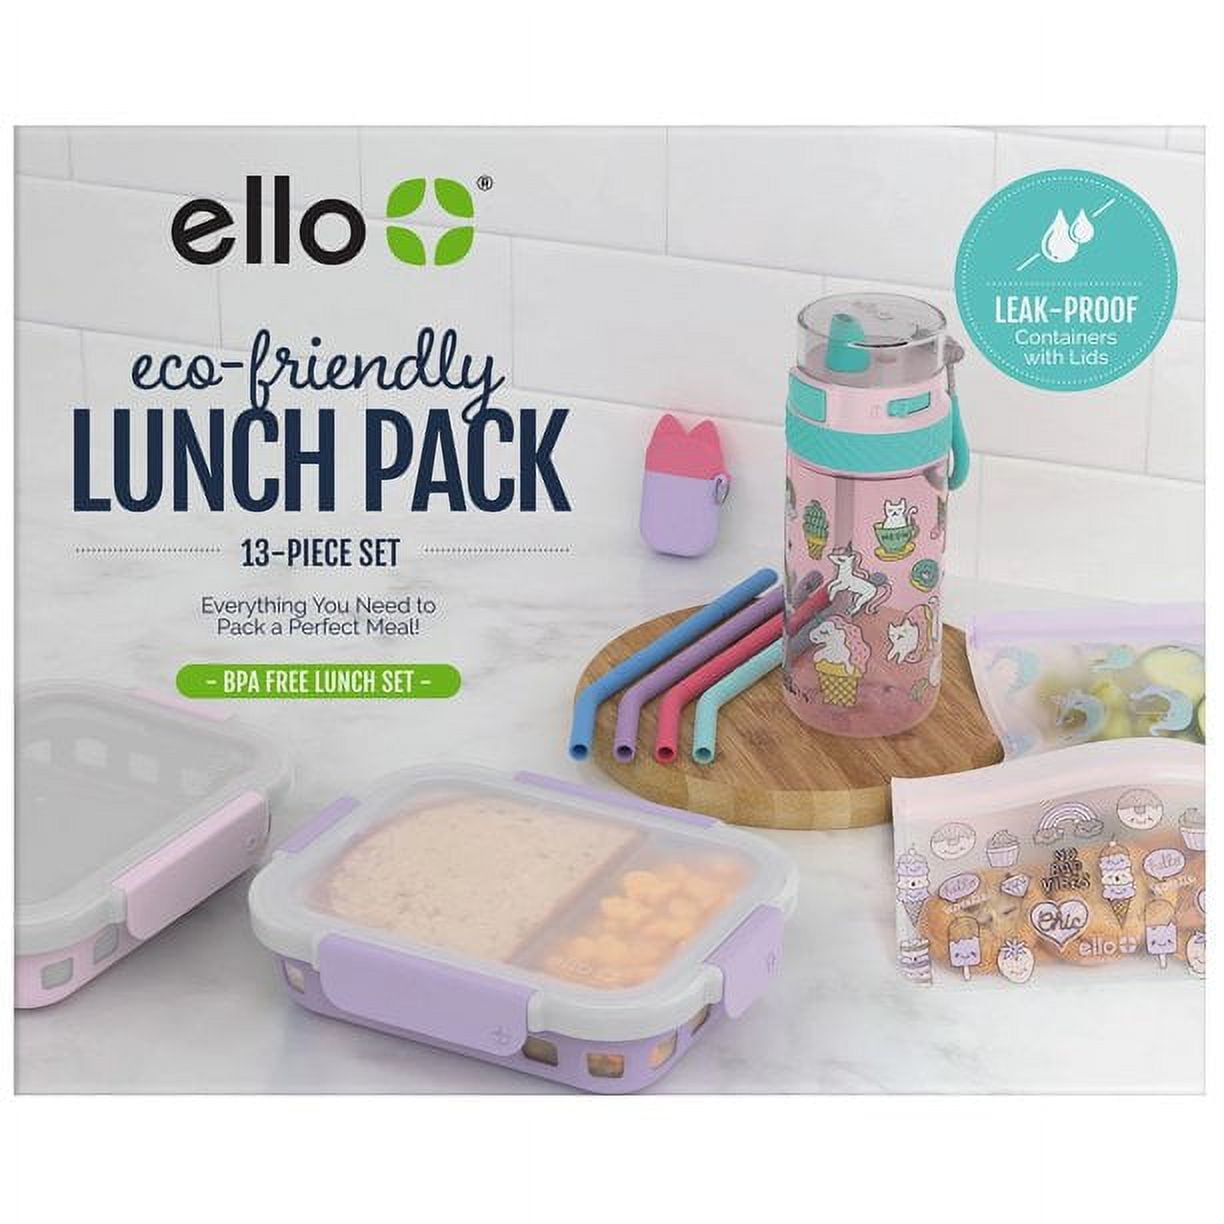 Ello 2-Compartment Glass Food Containers, 8-piece set